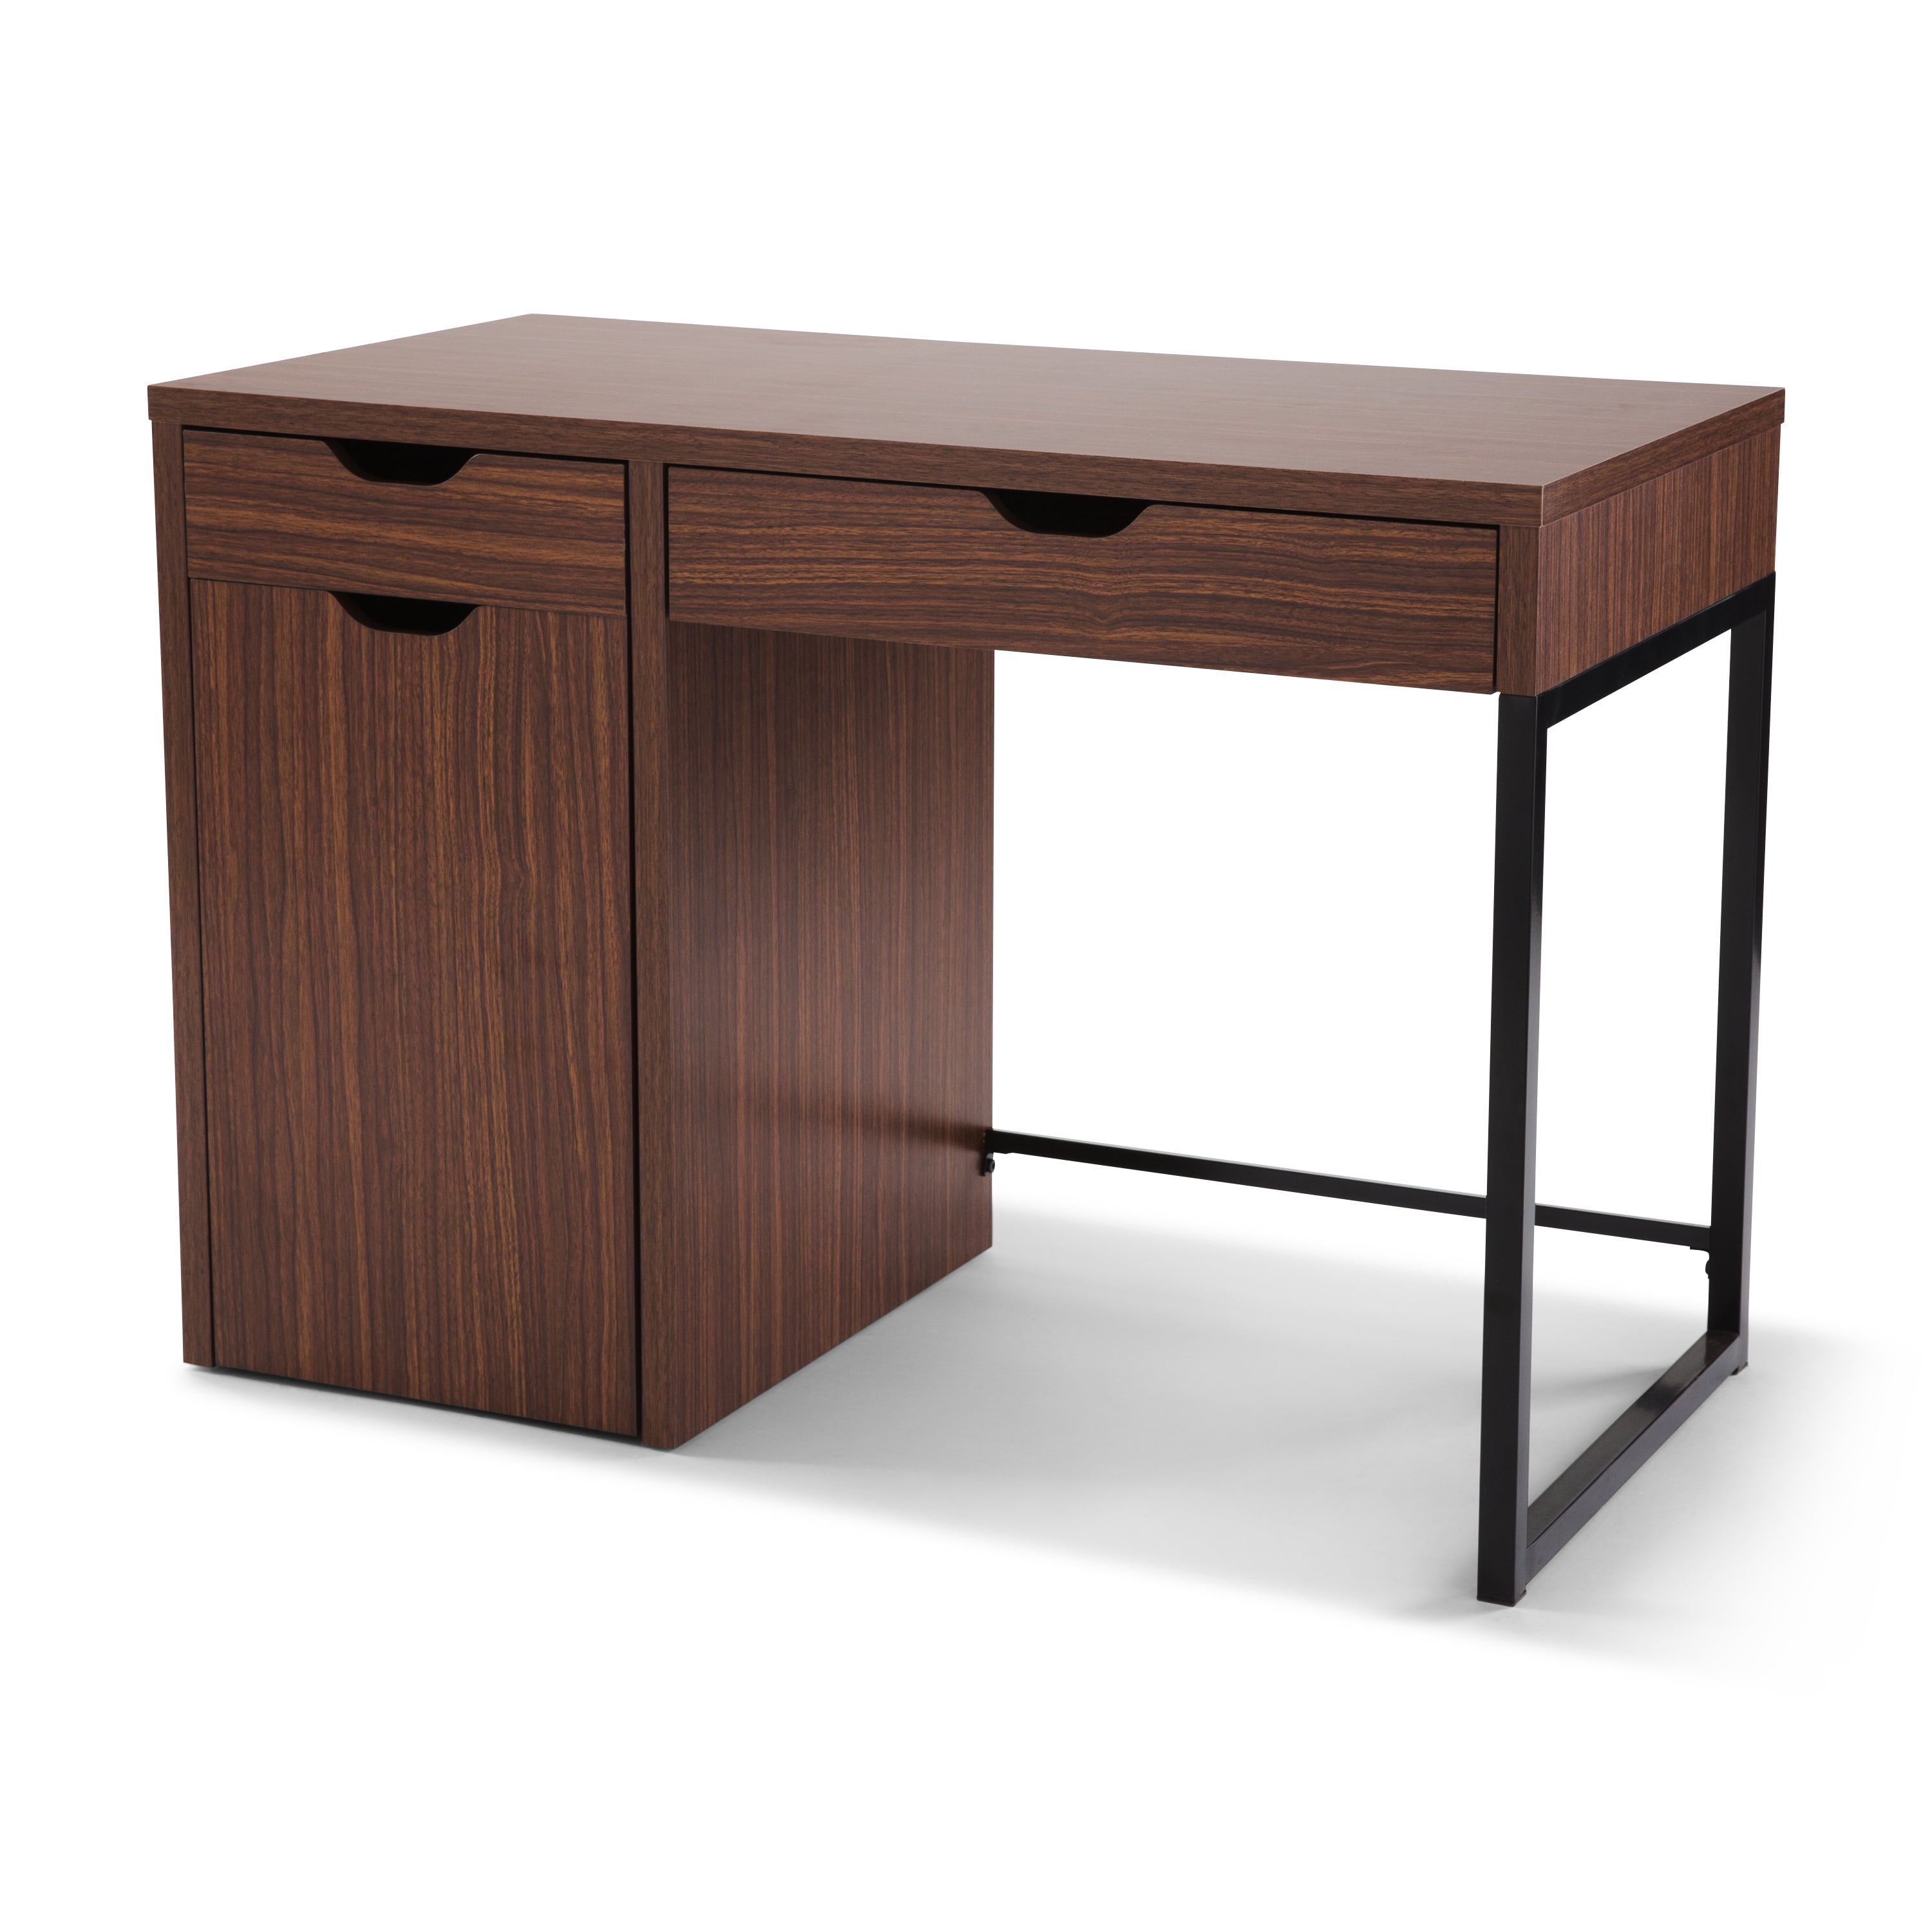 Mainstays Perkins Desk with Metal Frame, Cocoa (File Cabinet Sold